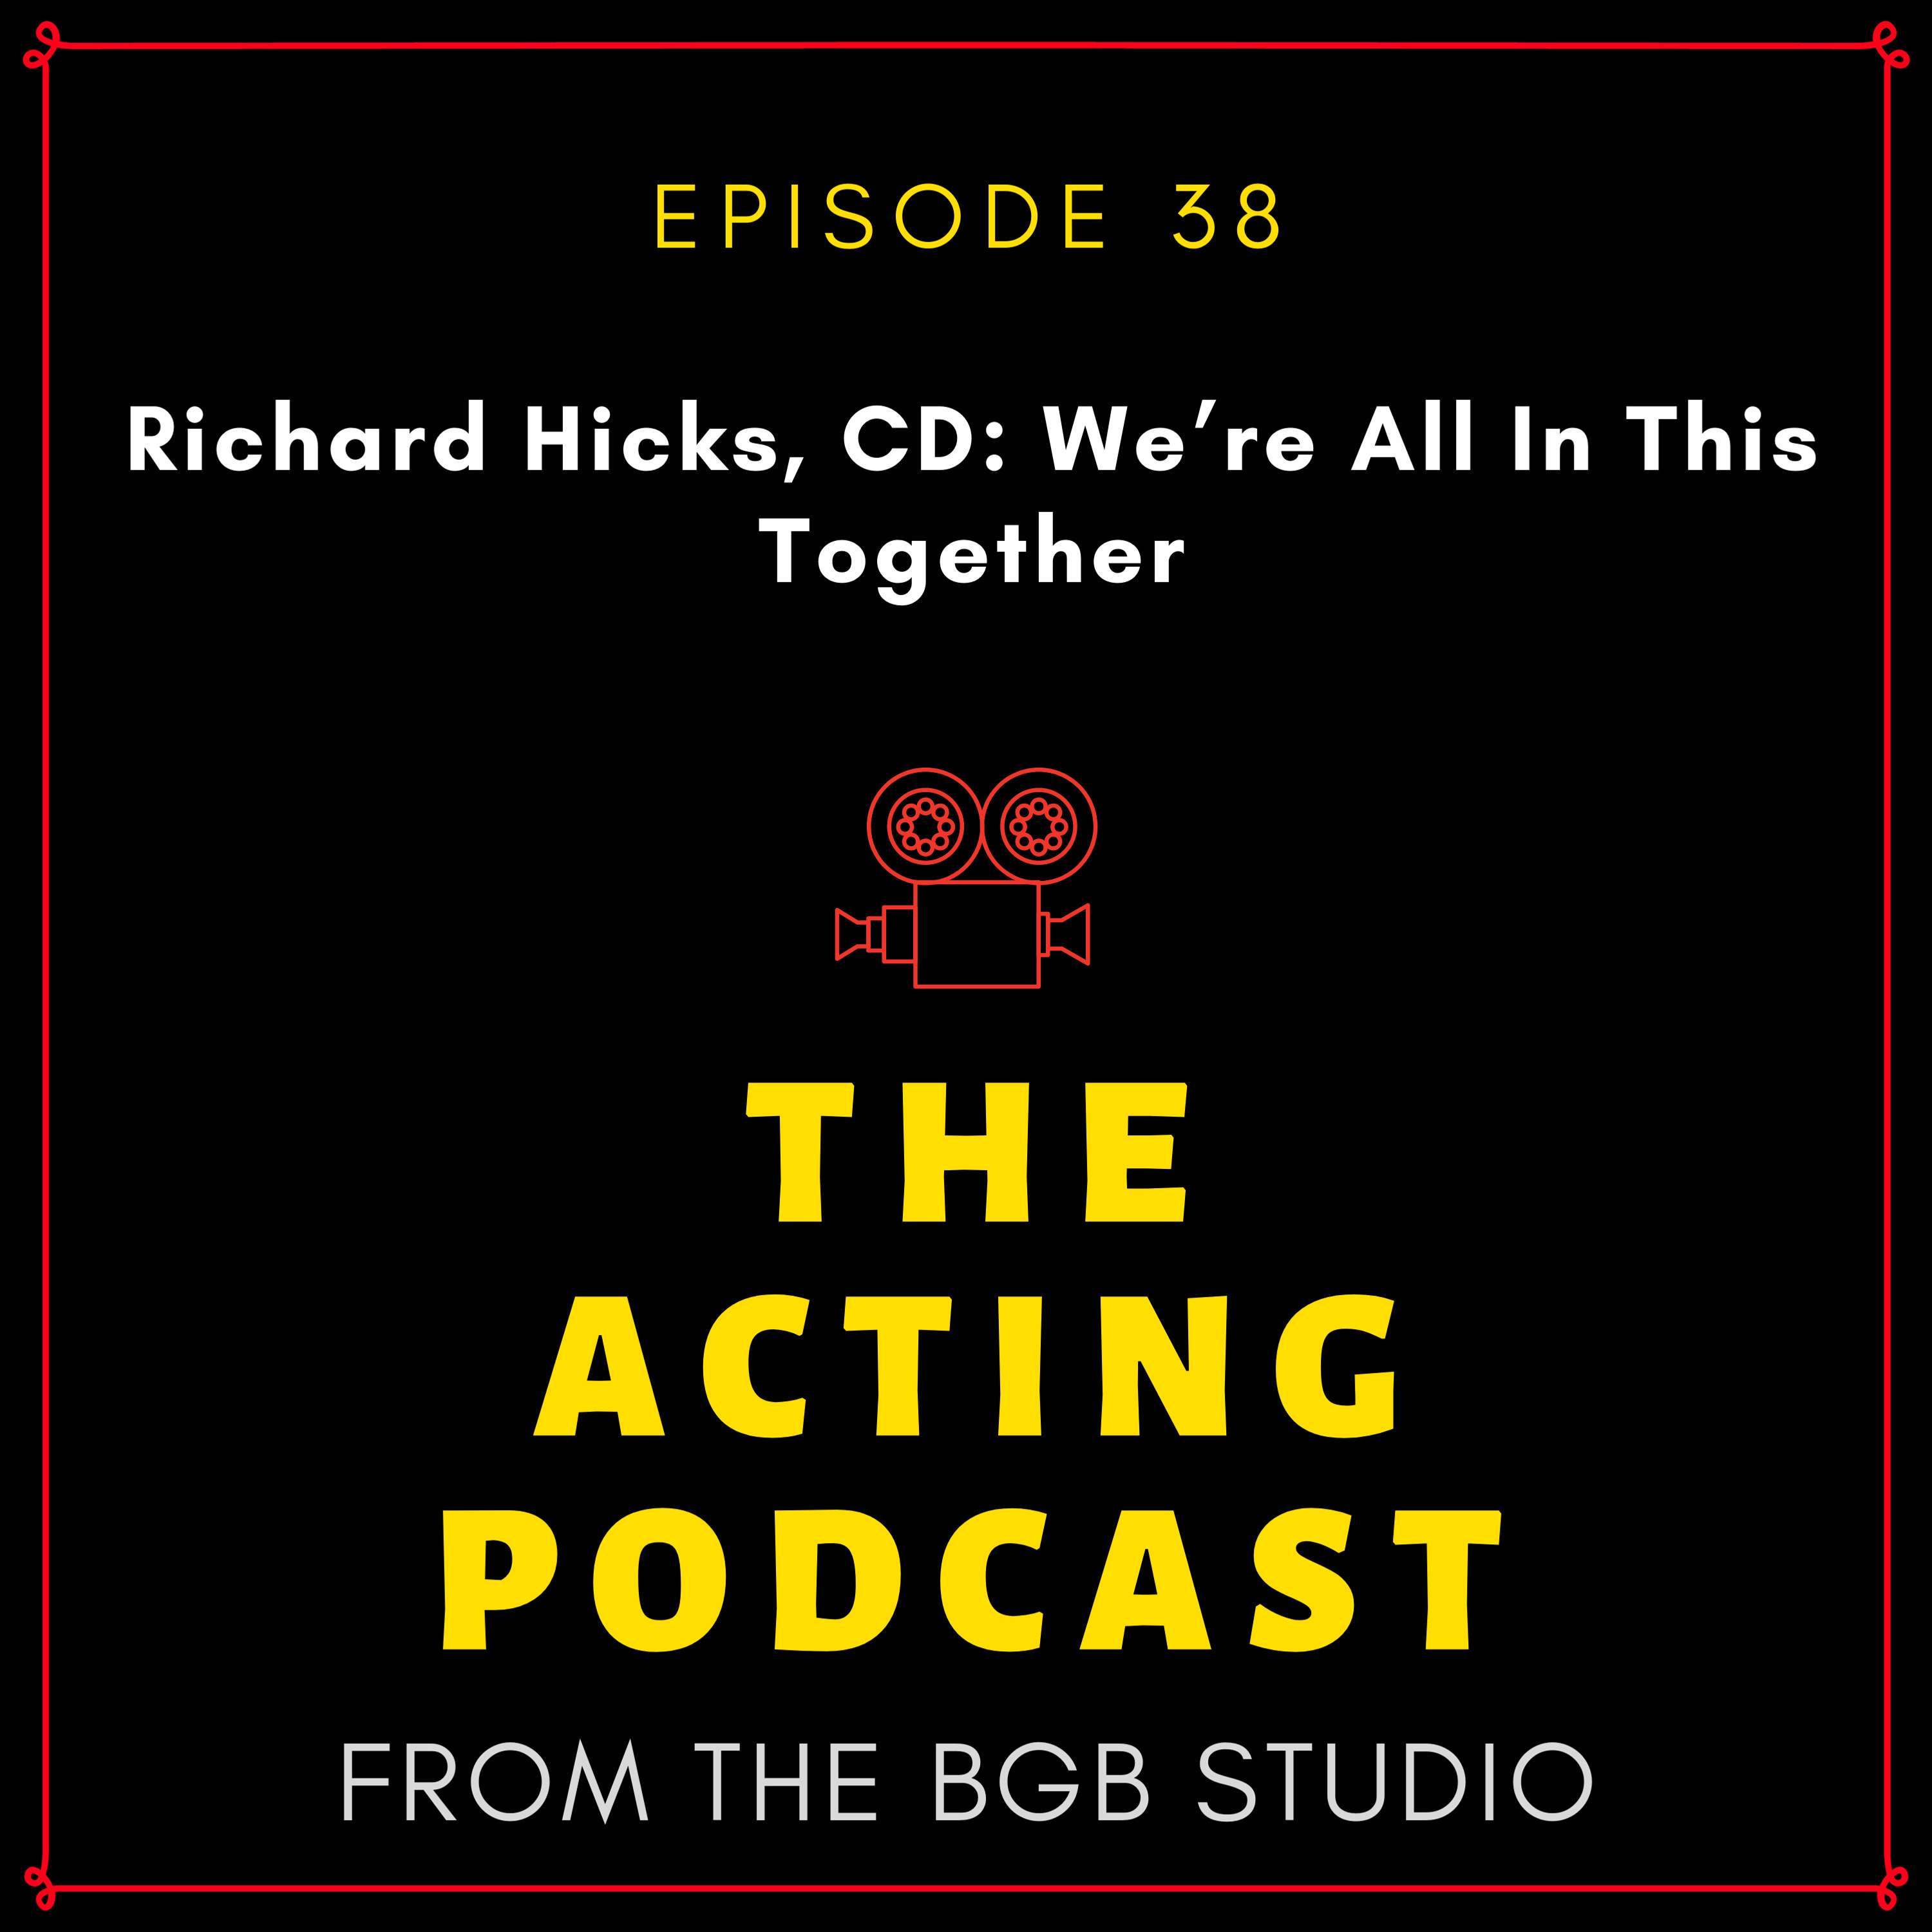 Richard Hicks, CD: We’re All In This Together